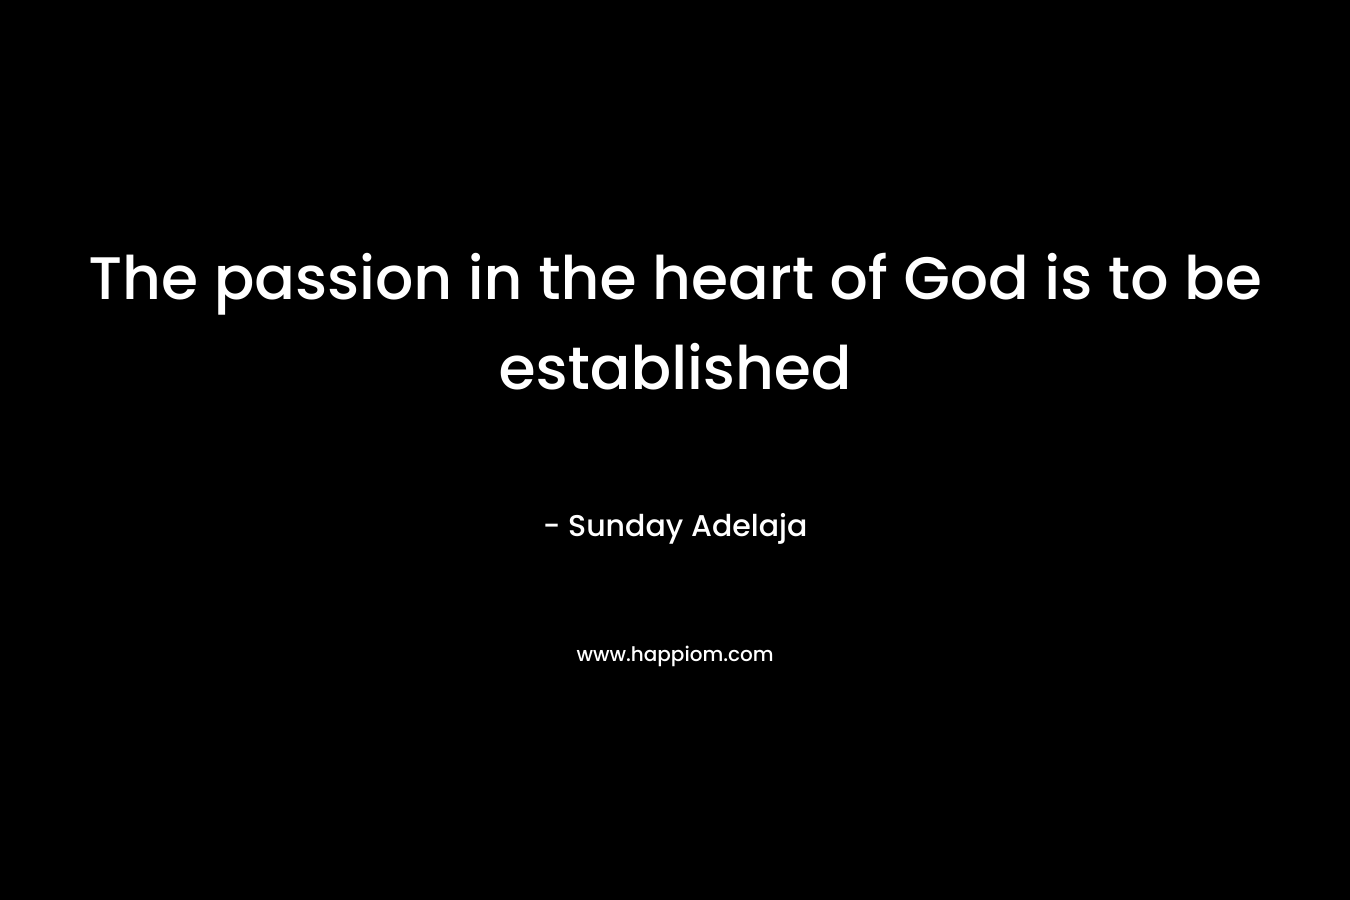 The passion in the heart of God is to be established